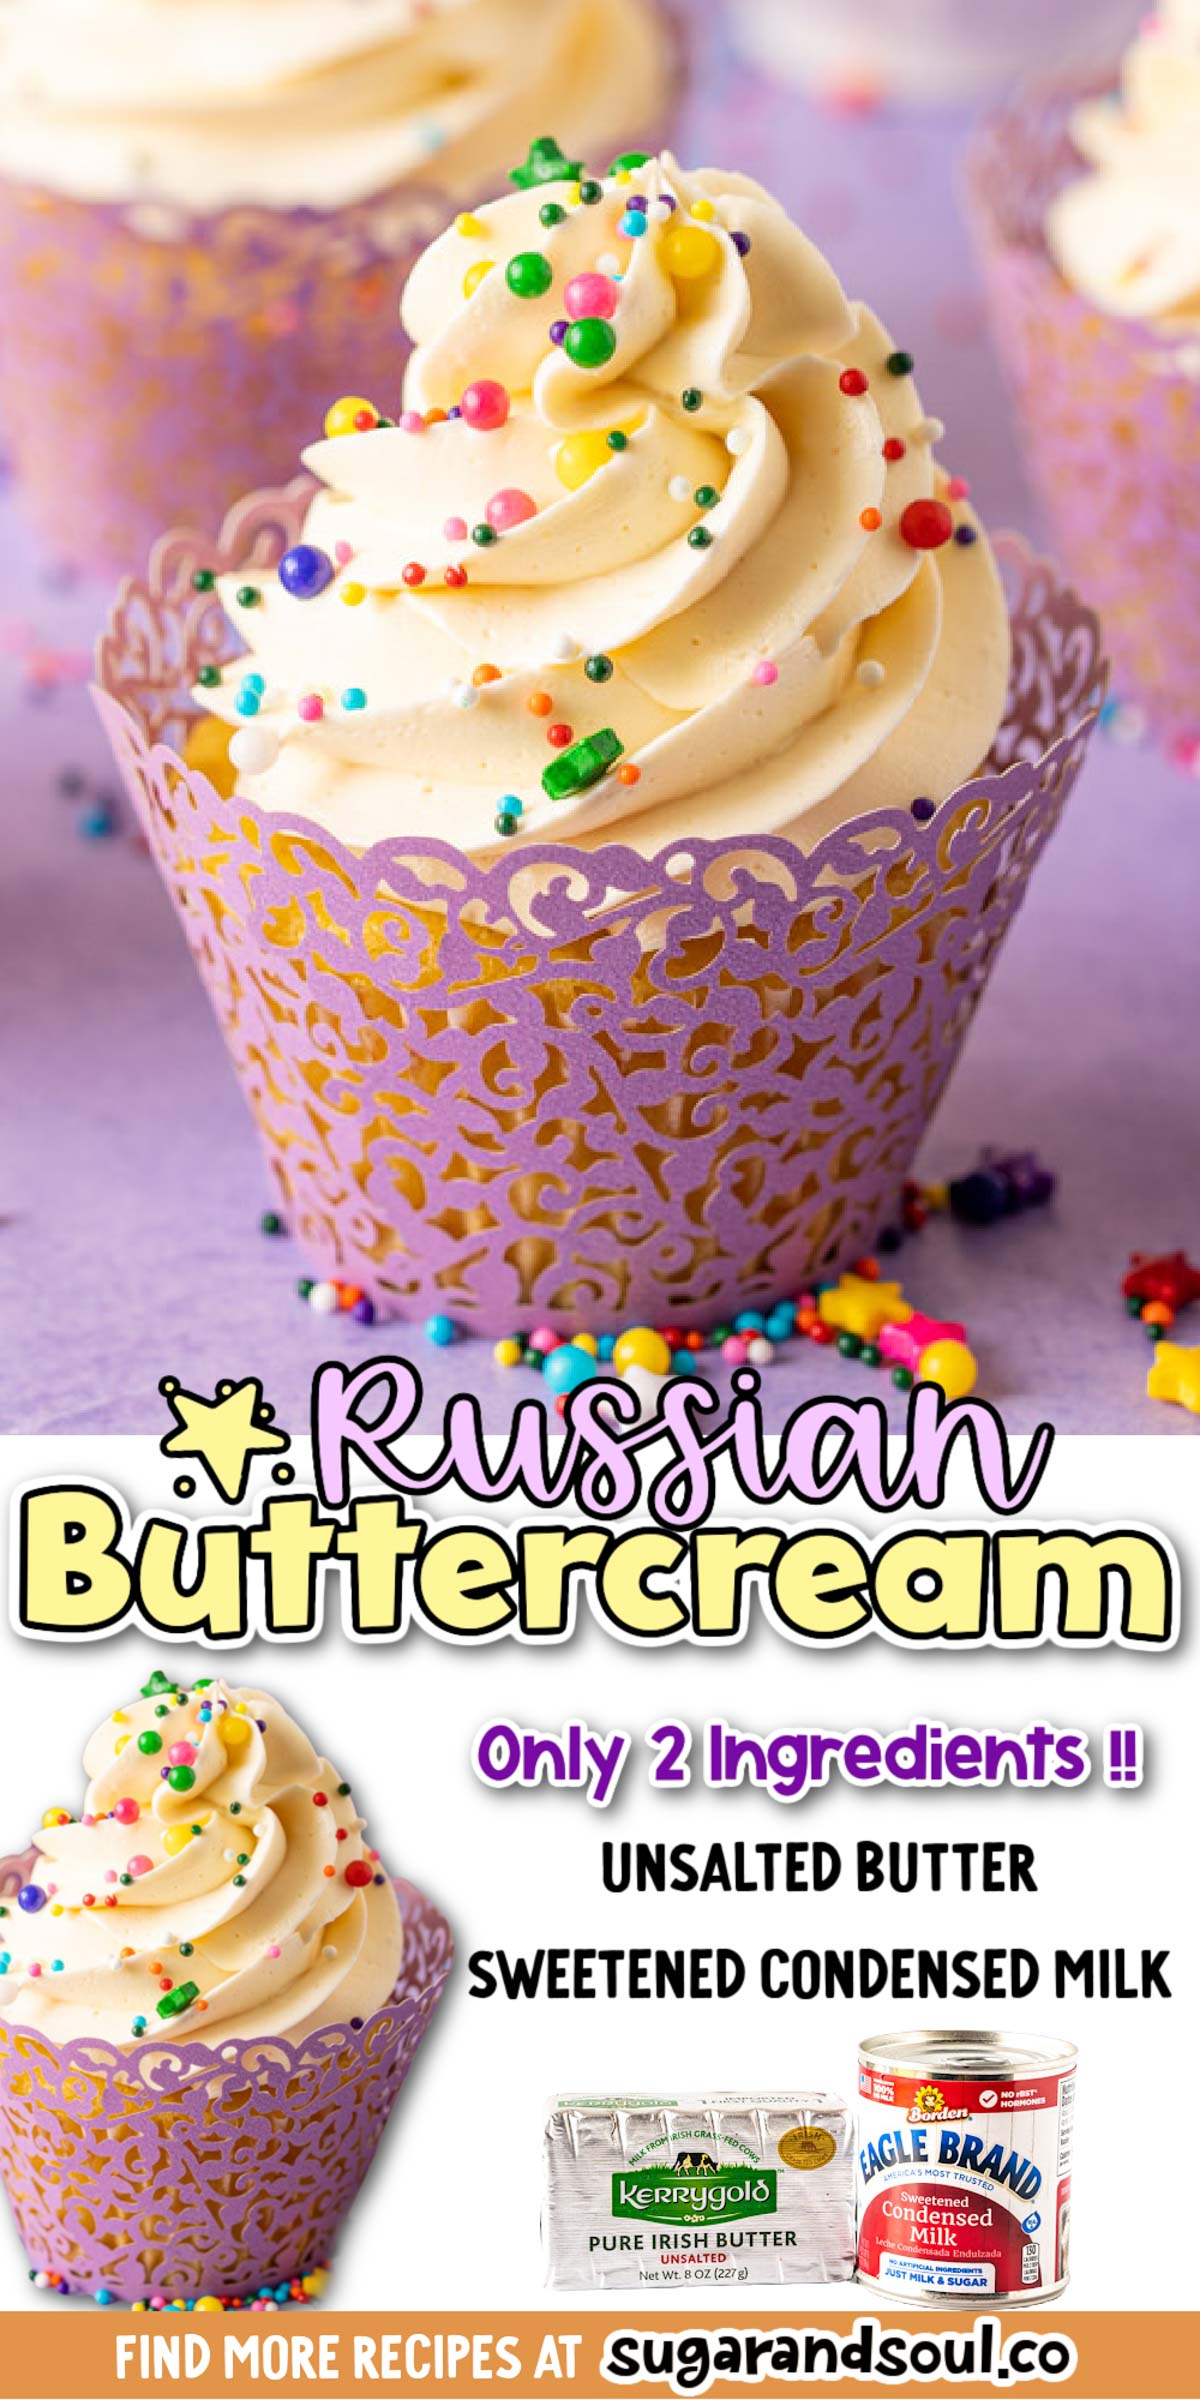 Russian Buttercream is Sweetened Condensed Milk Frosting that's silky smooth and sweet, made with only 2 ingredients in less than 10 minutes! via @sugarandsoulco